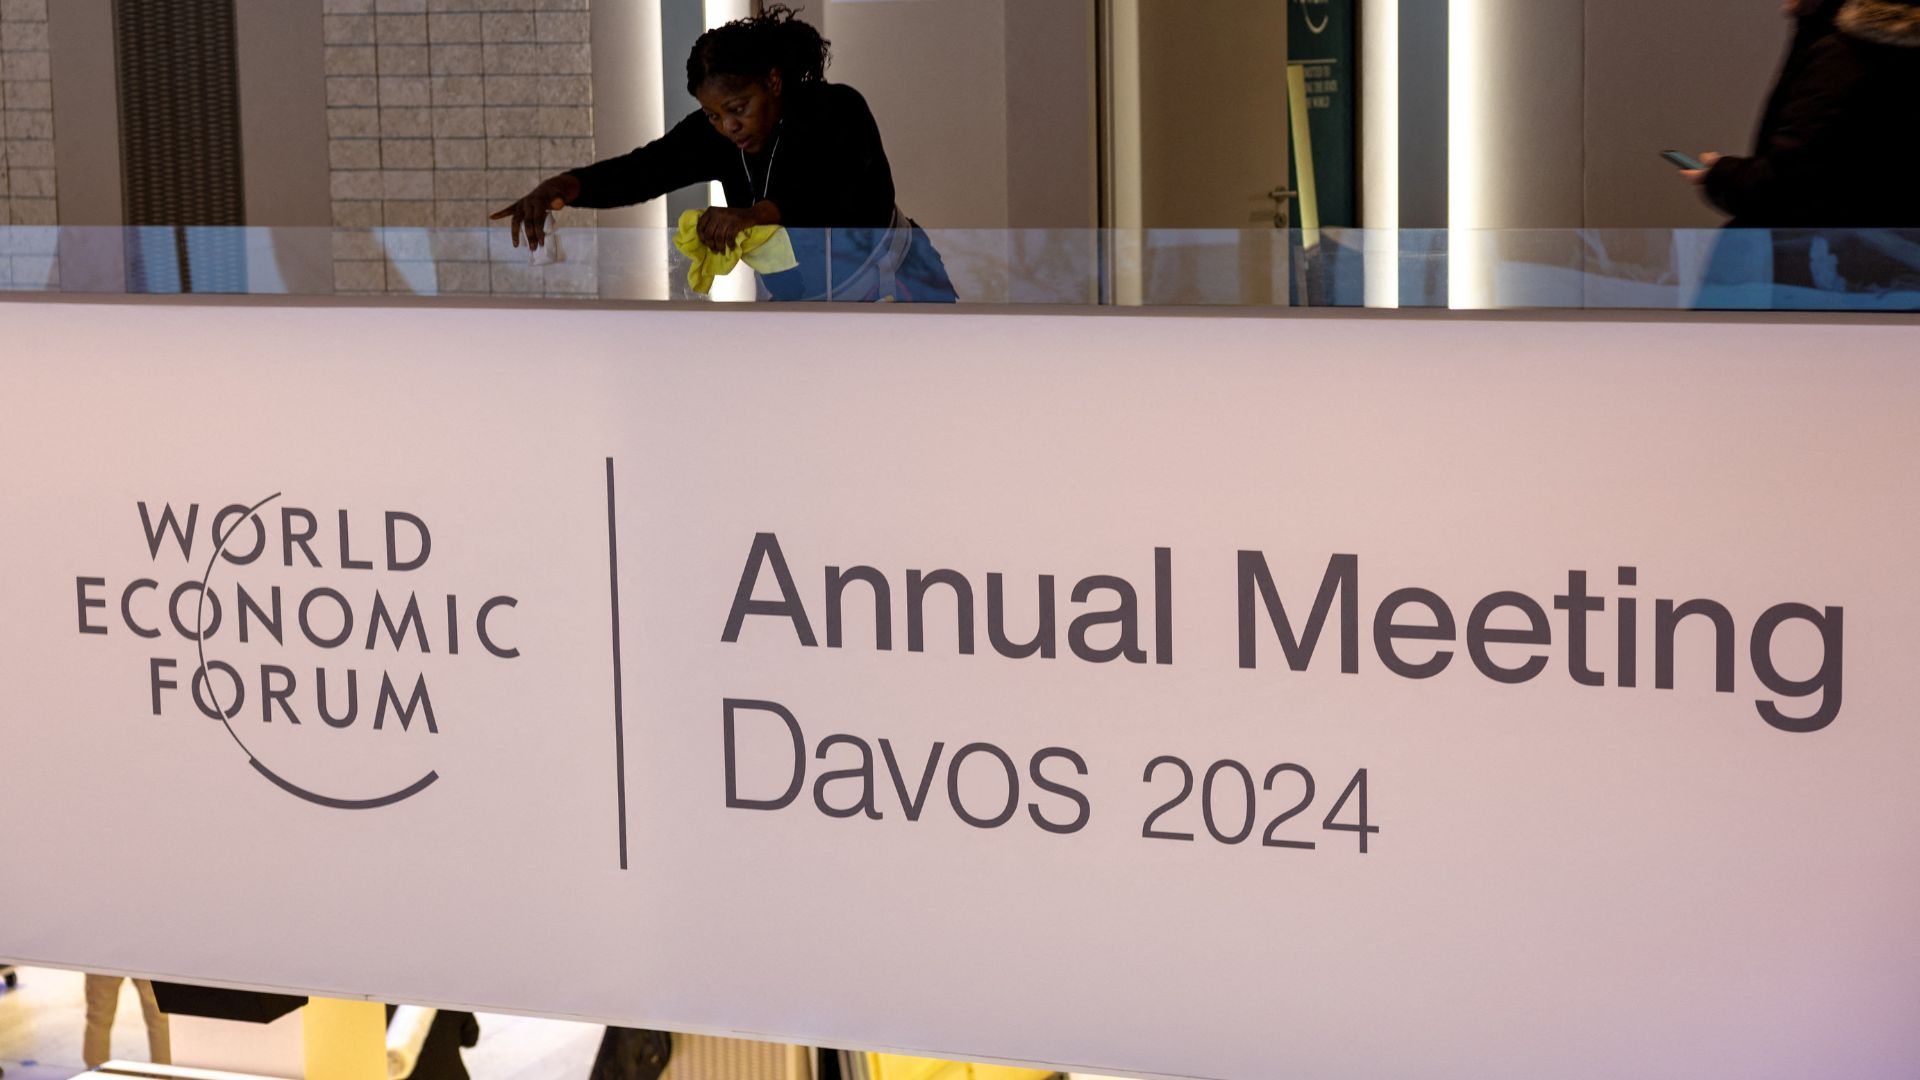 Davos 2024, From Ikea to Mastercard, here’s why global leaders believe India is a bright spot